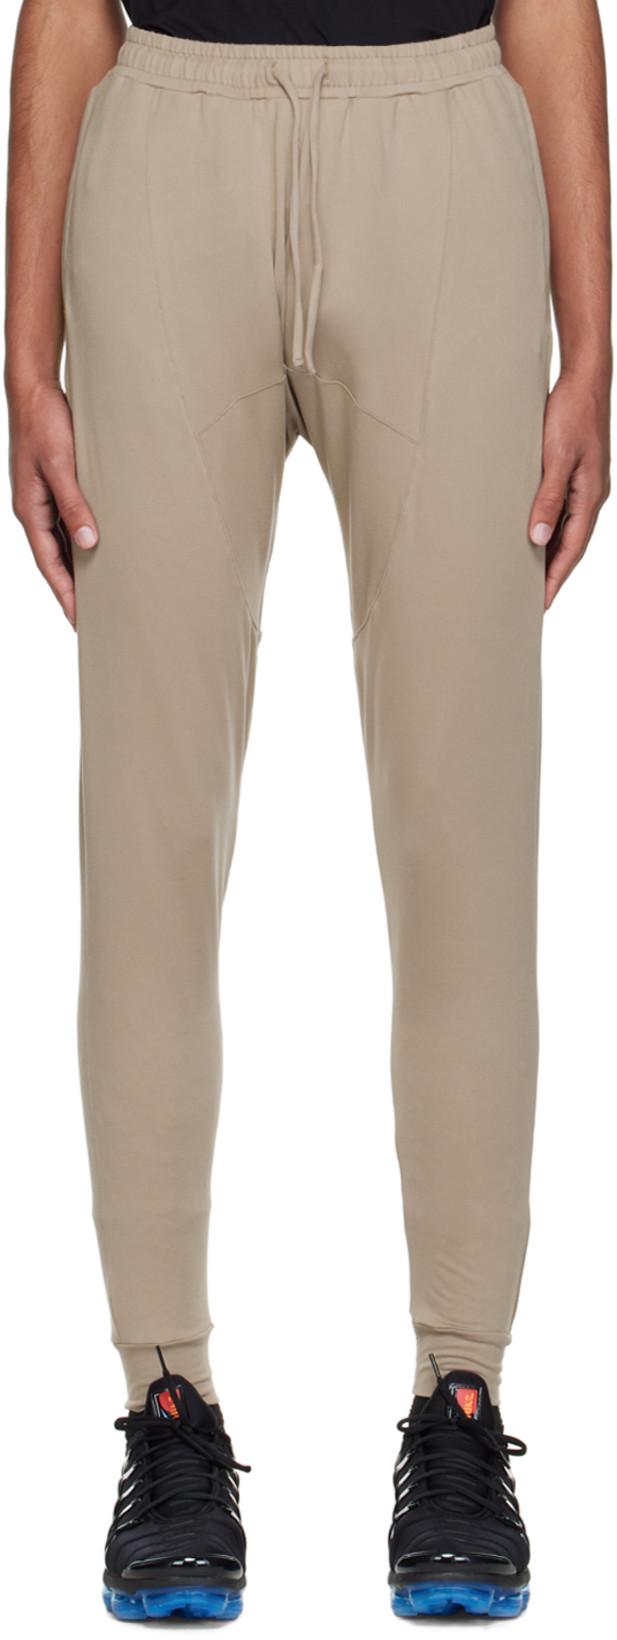 Beige Conquer Revitalize Lounge Pants by ALO YOGA